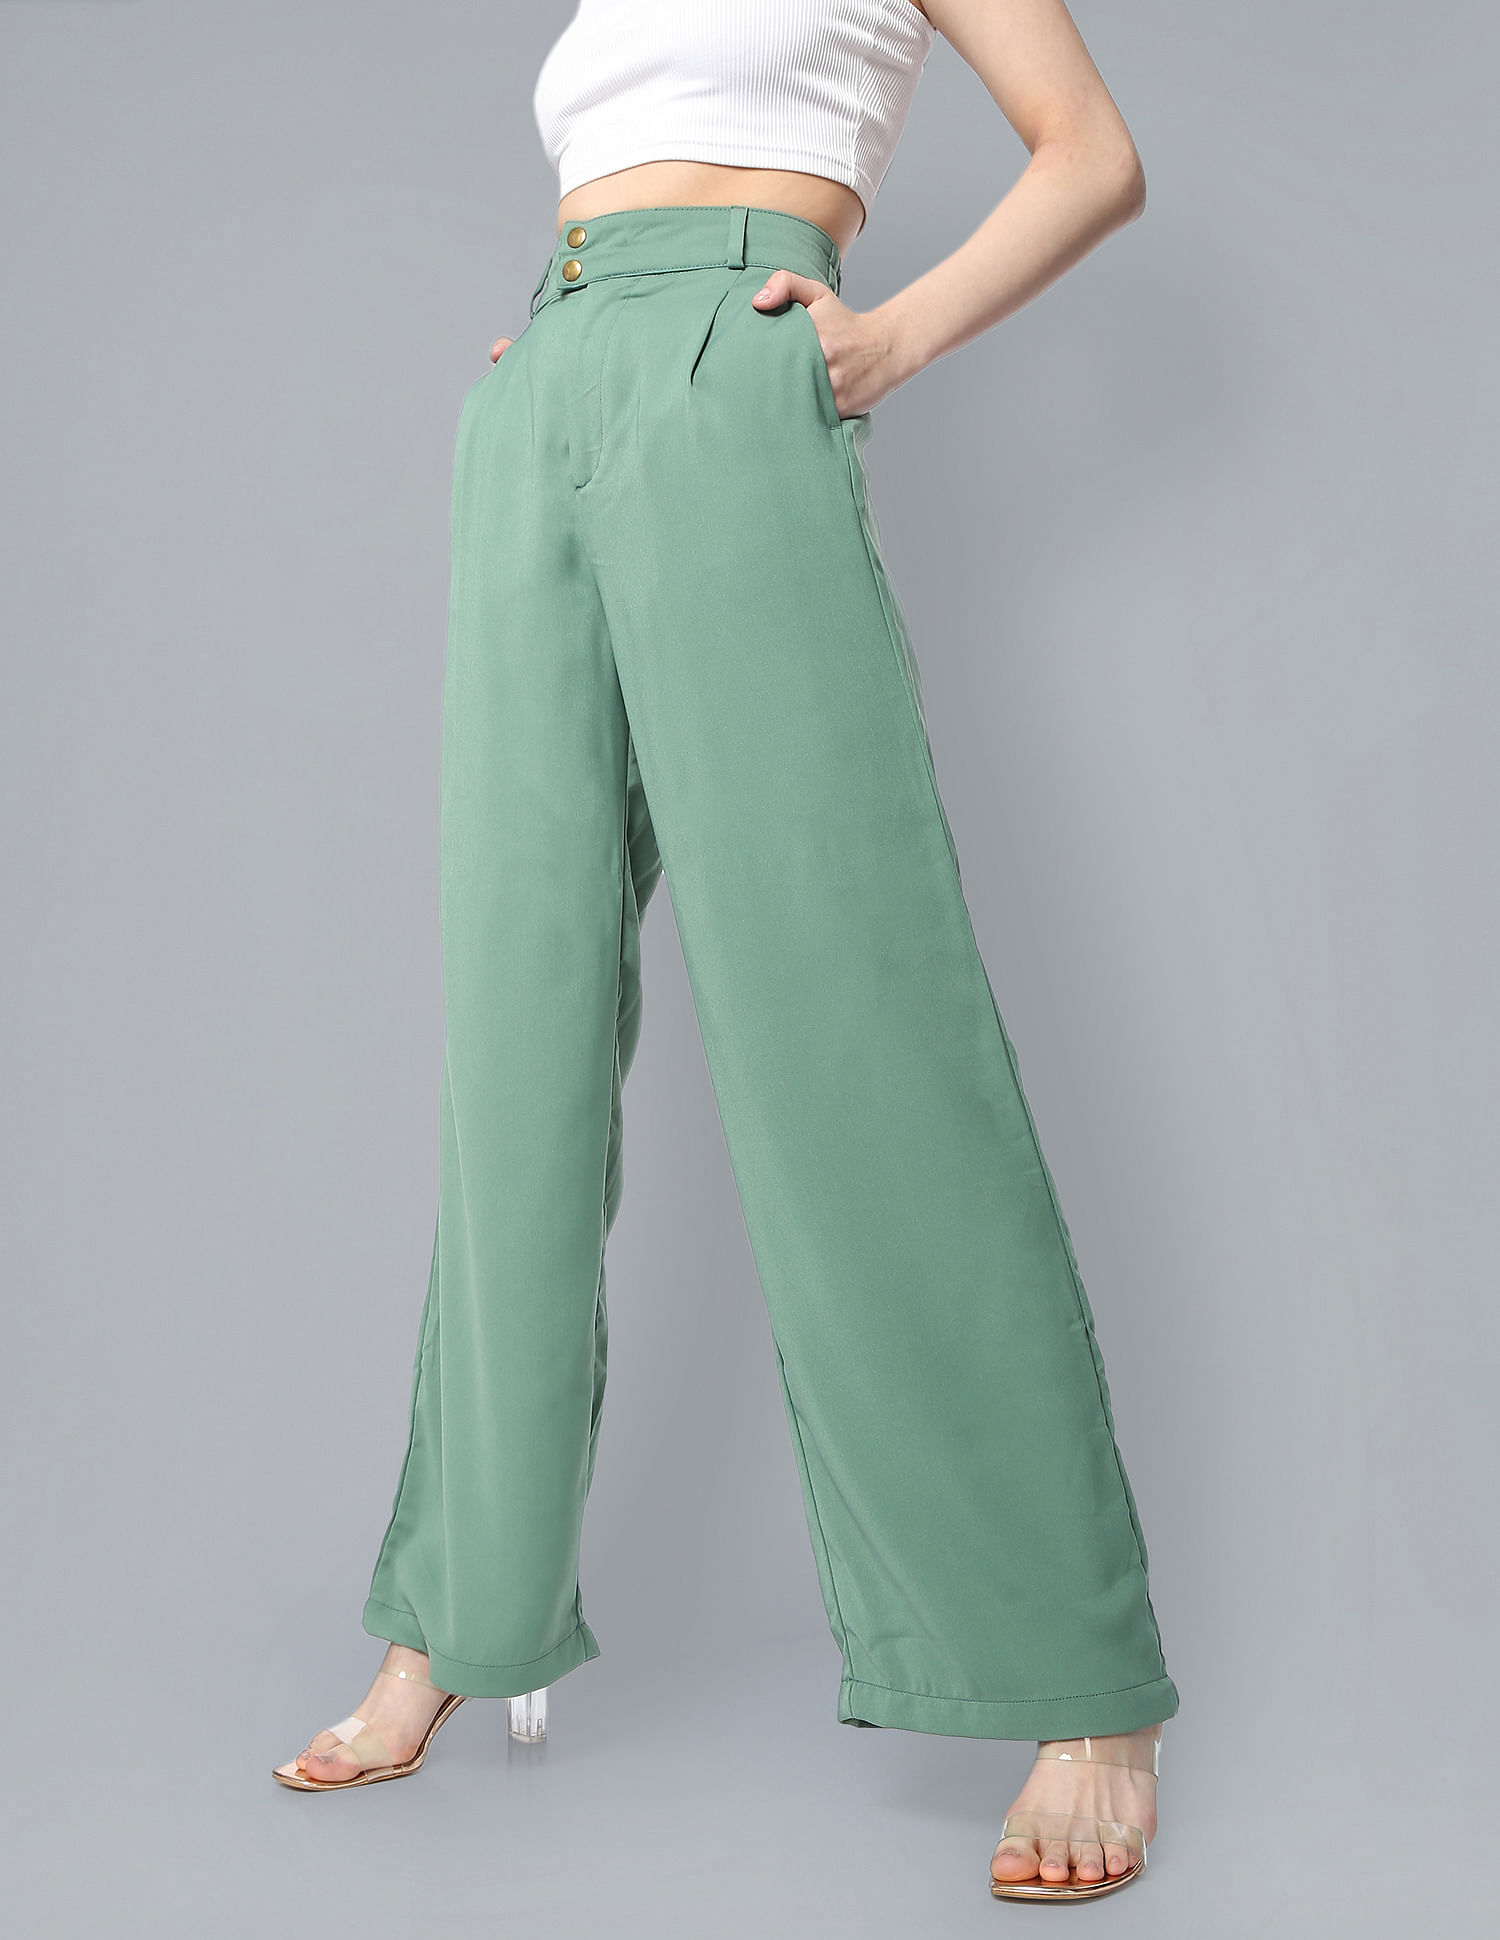 Itaso High Waist Flare Trousers in Blue Print  Oh Polly